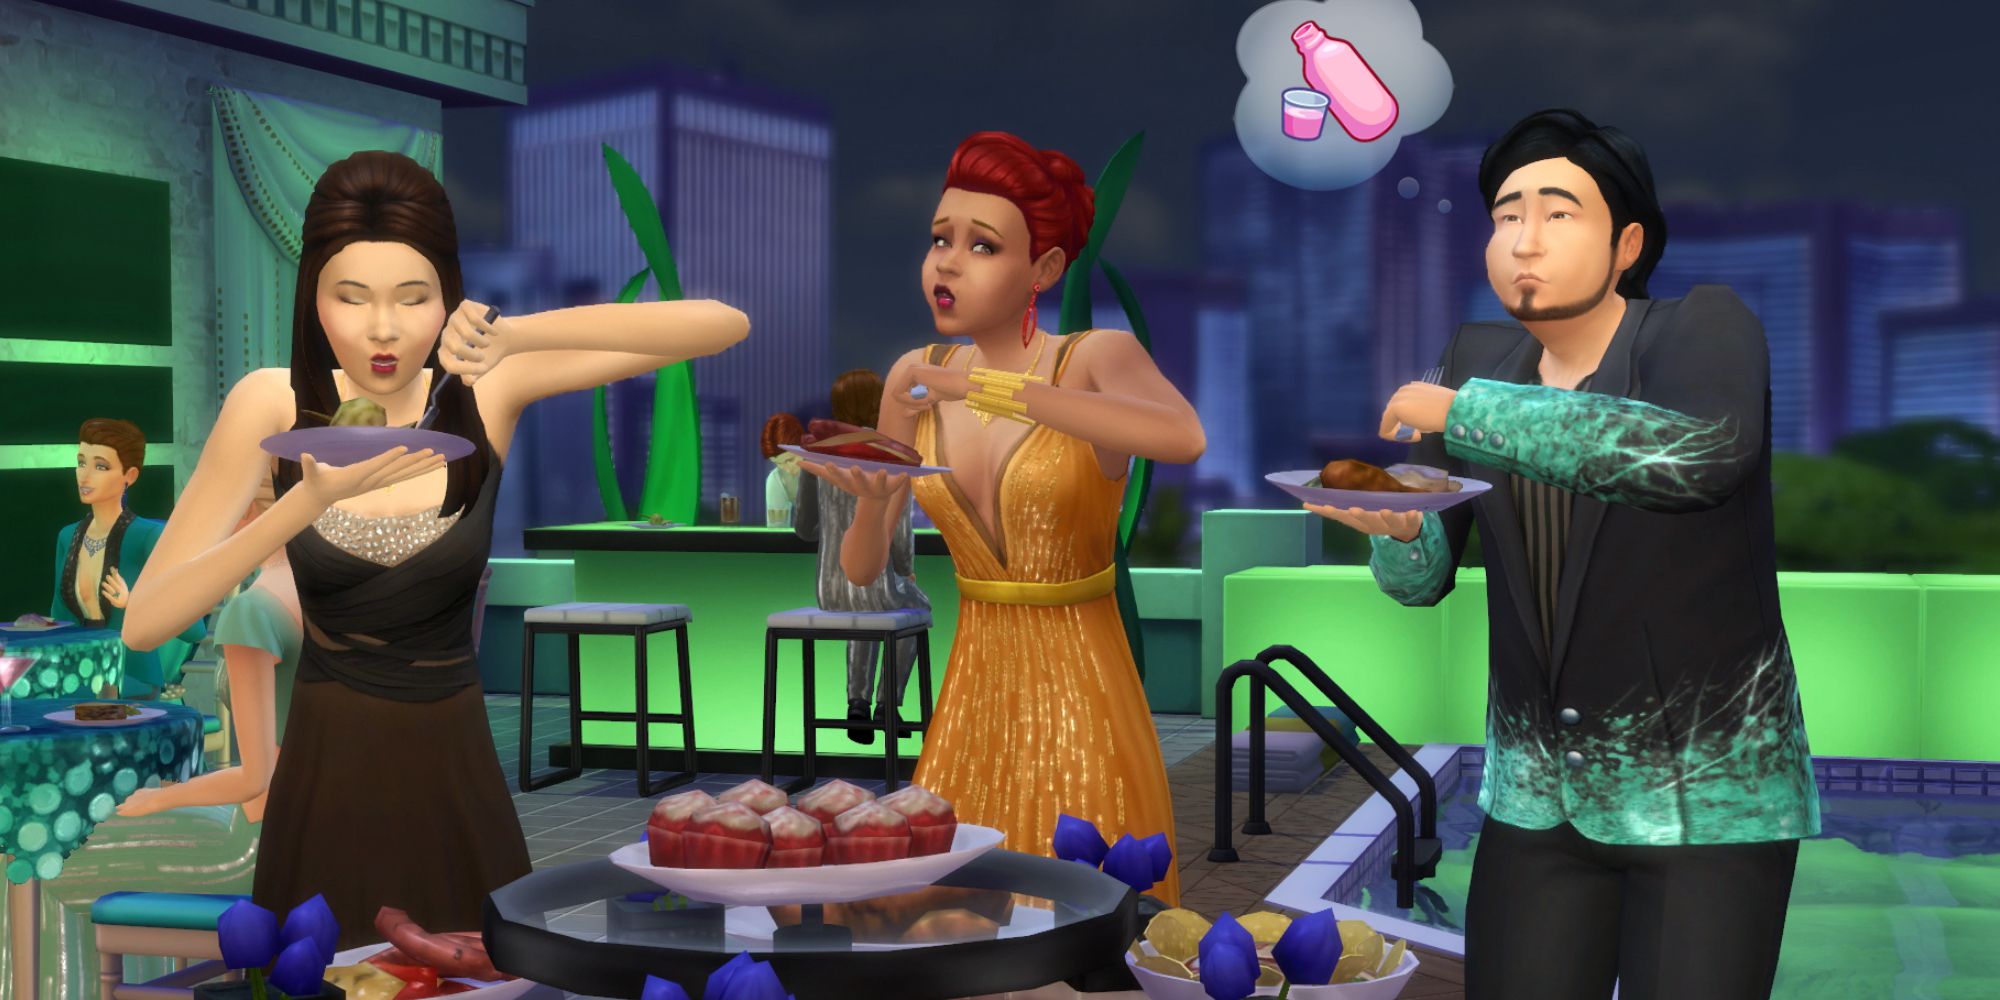 Sims 4 luxury party guests eating